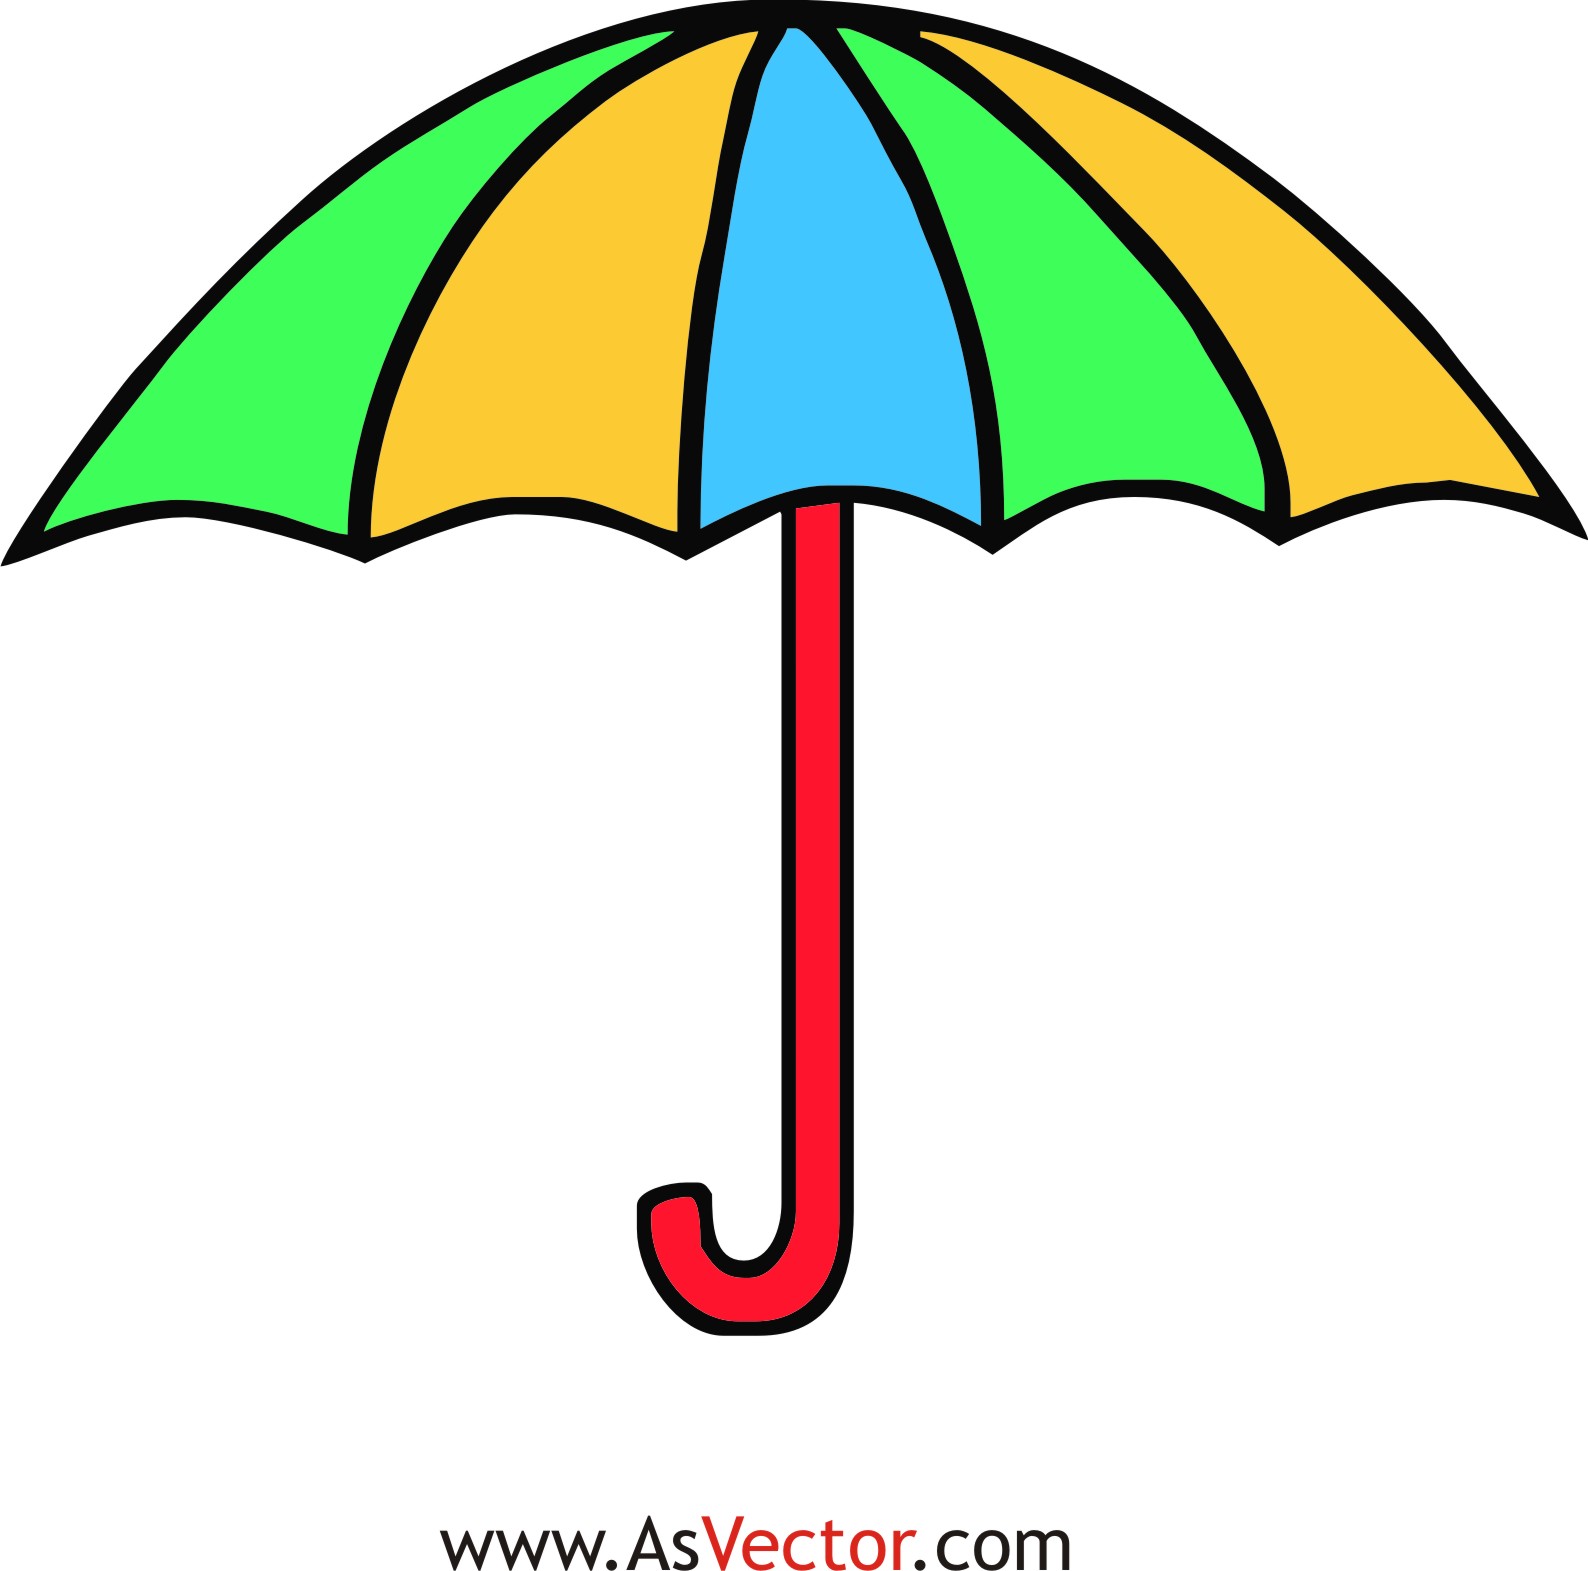 clipart picture of an umbrella - photo #11